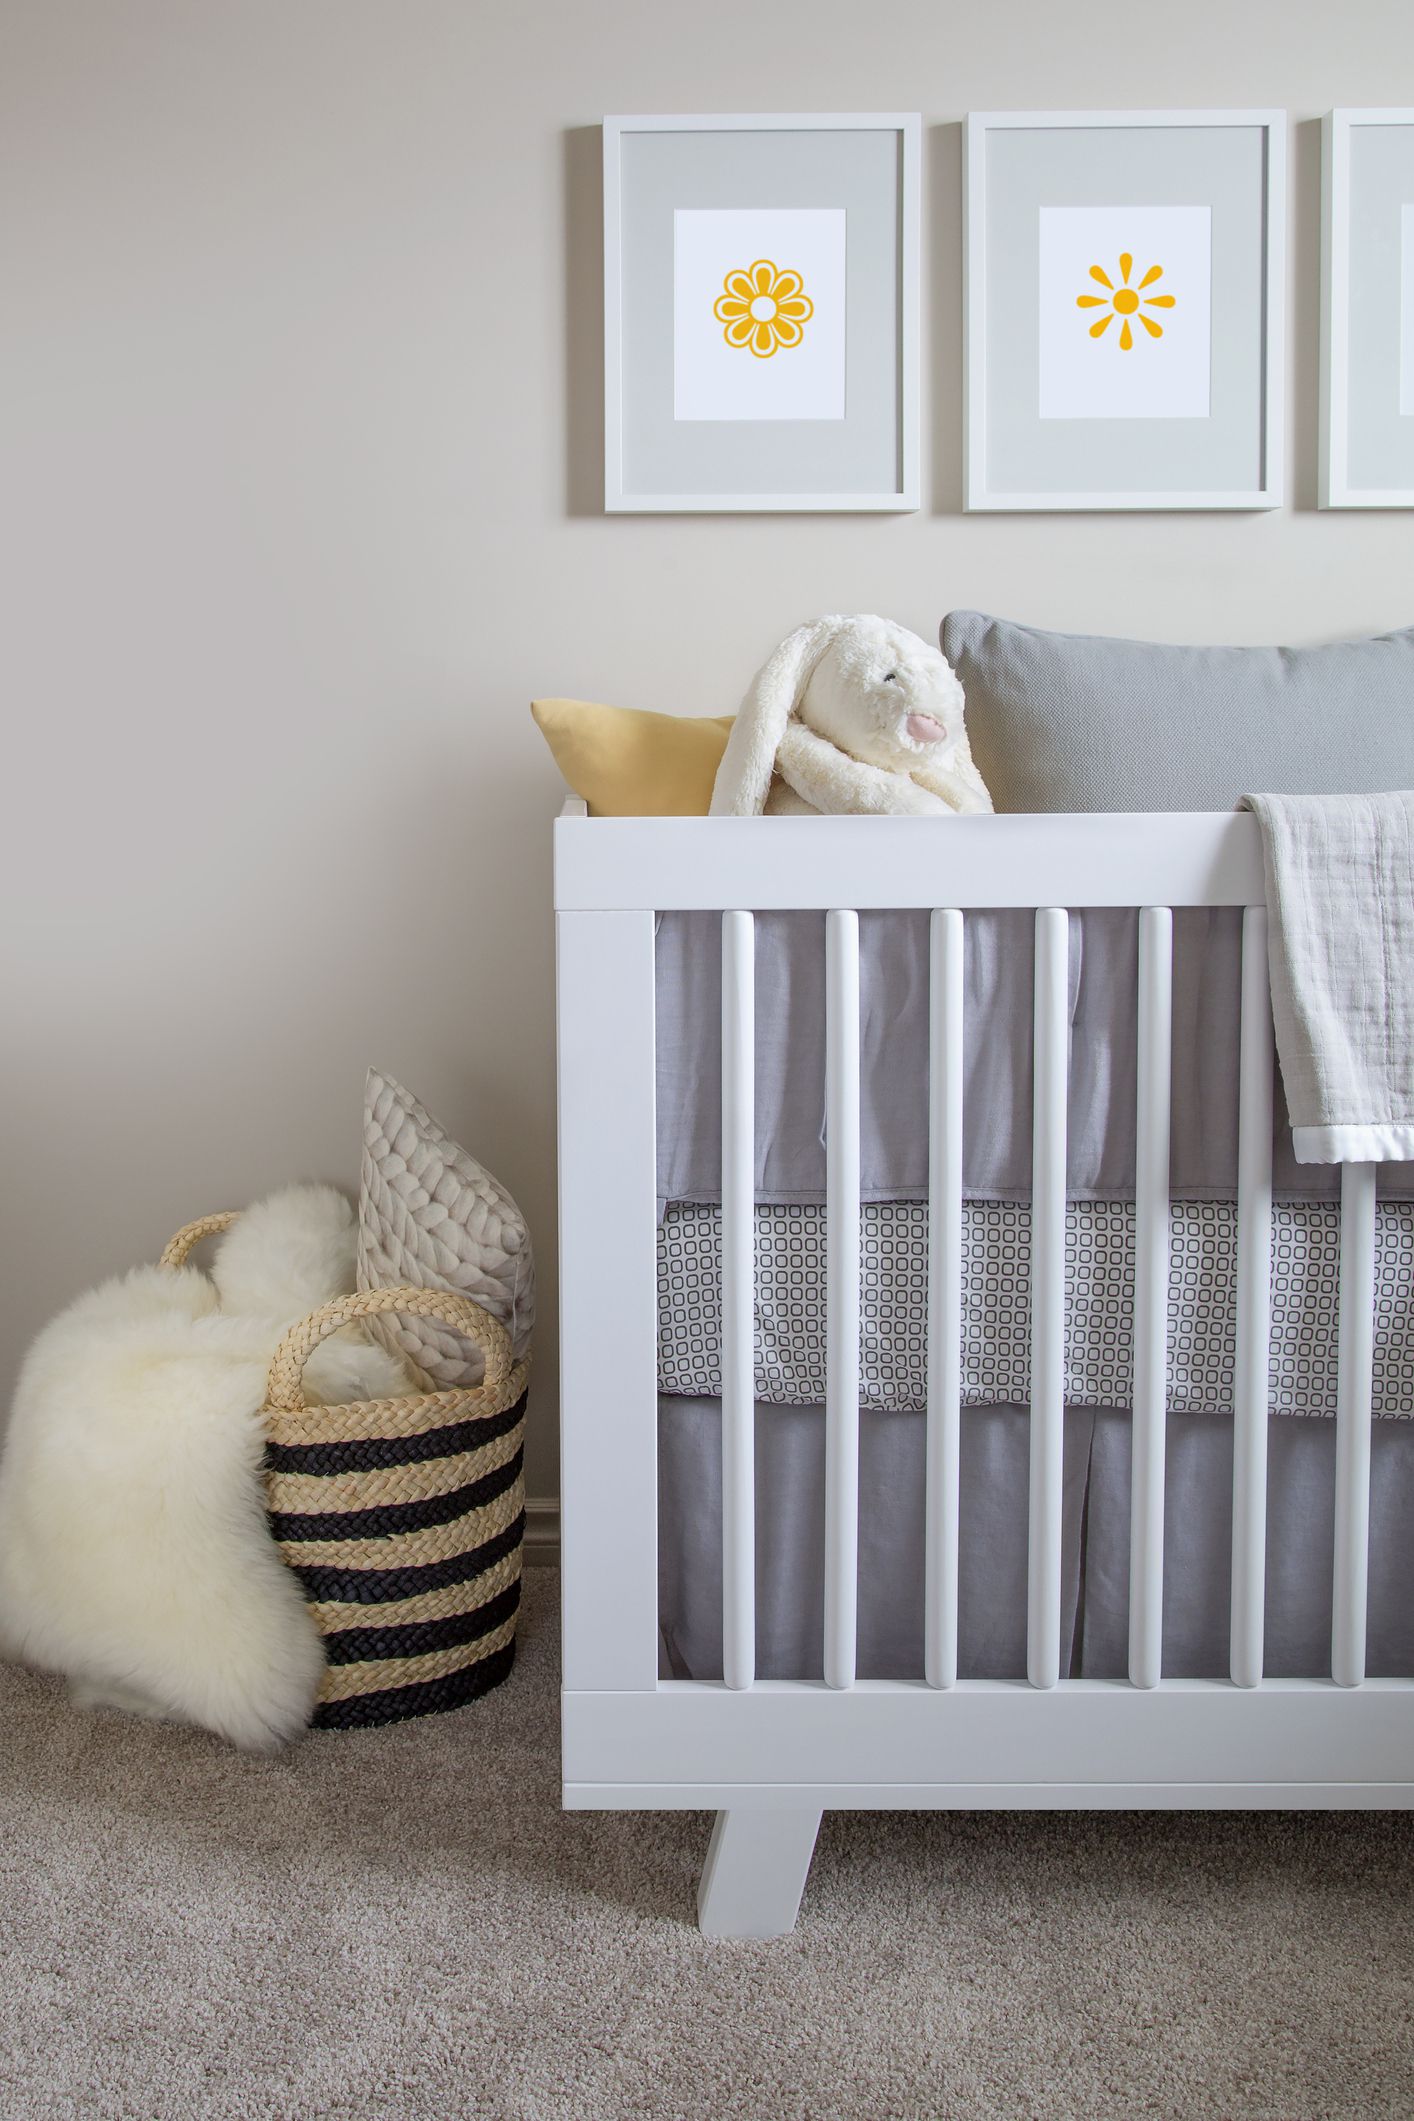 Top 10 Storage Solutions for Kids' Bedrooms Without Closets